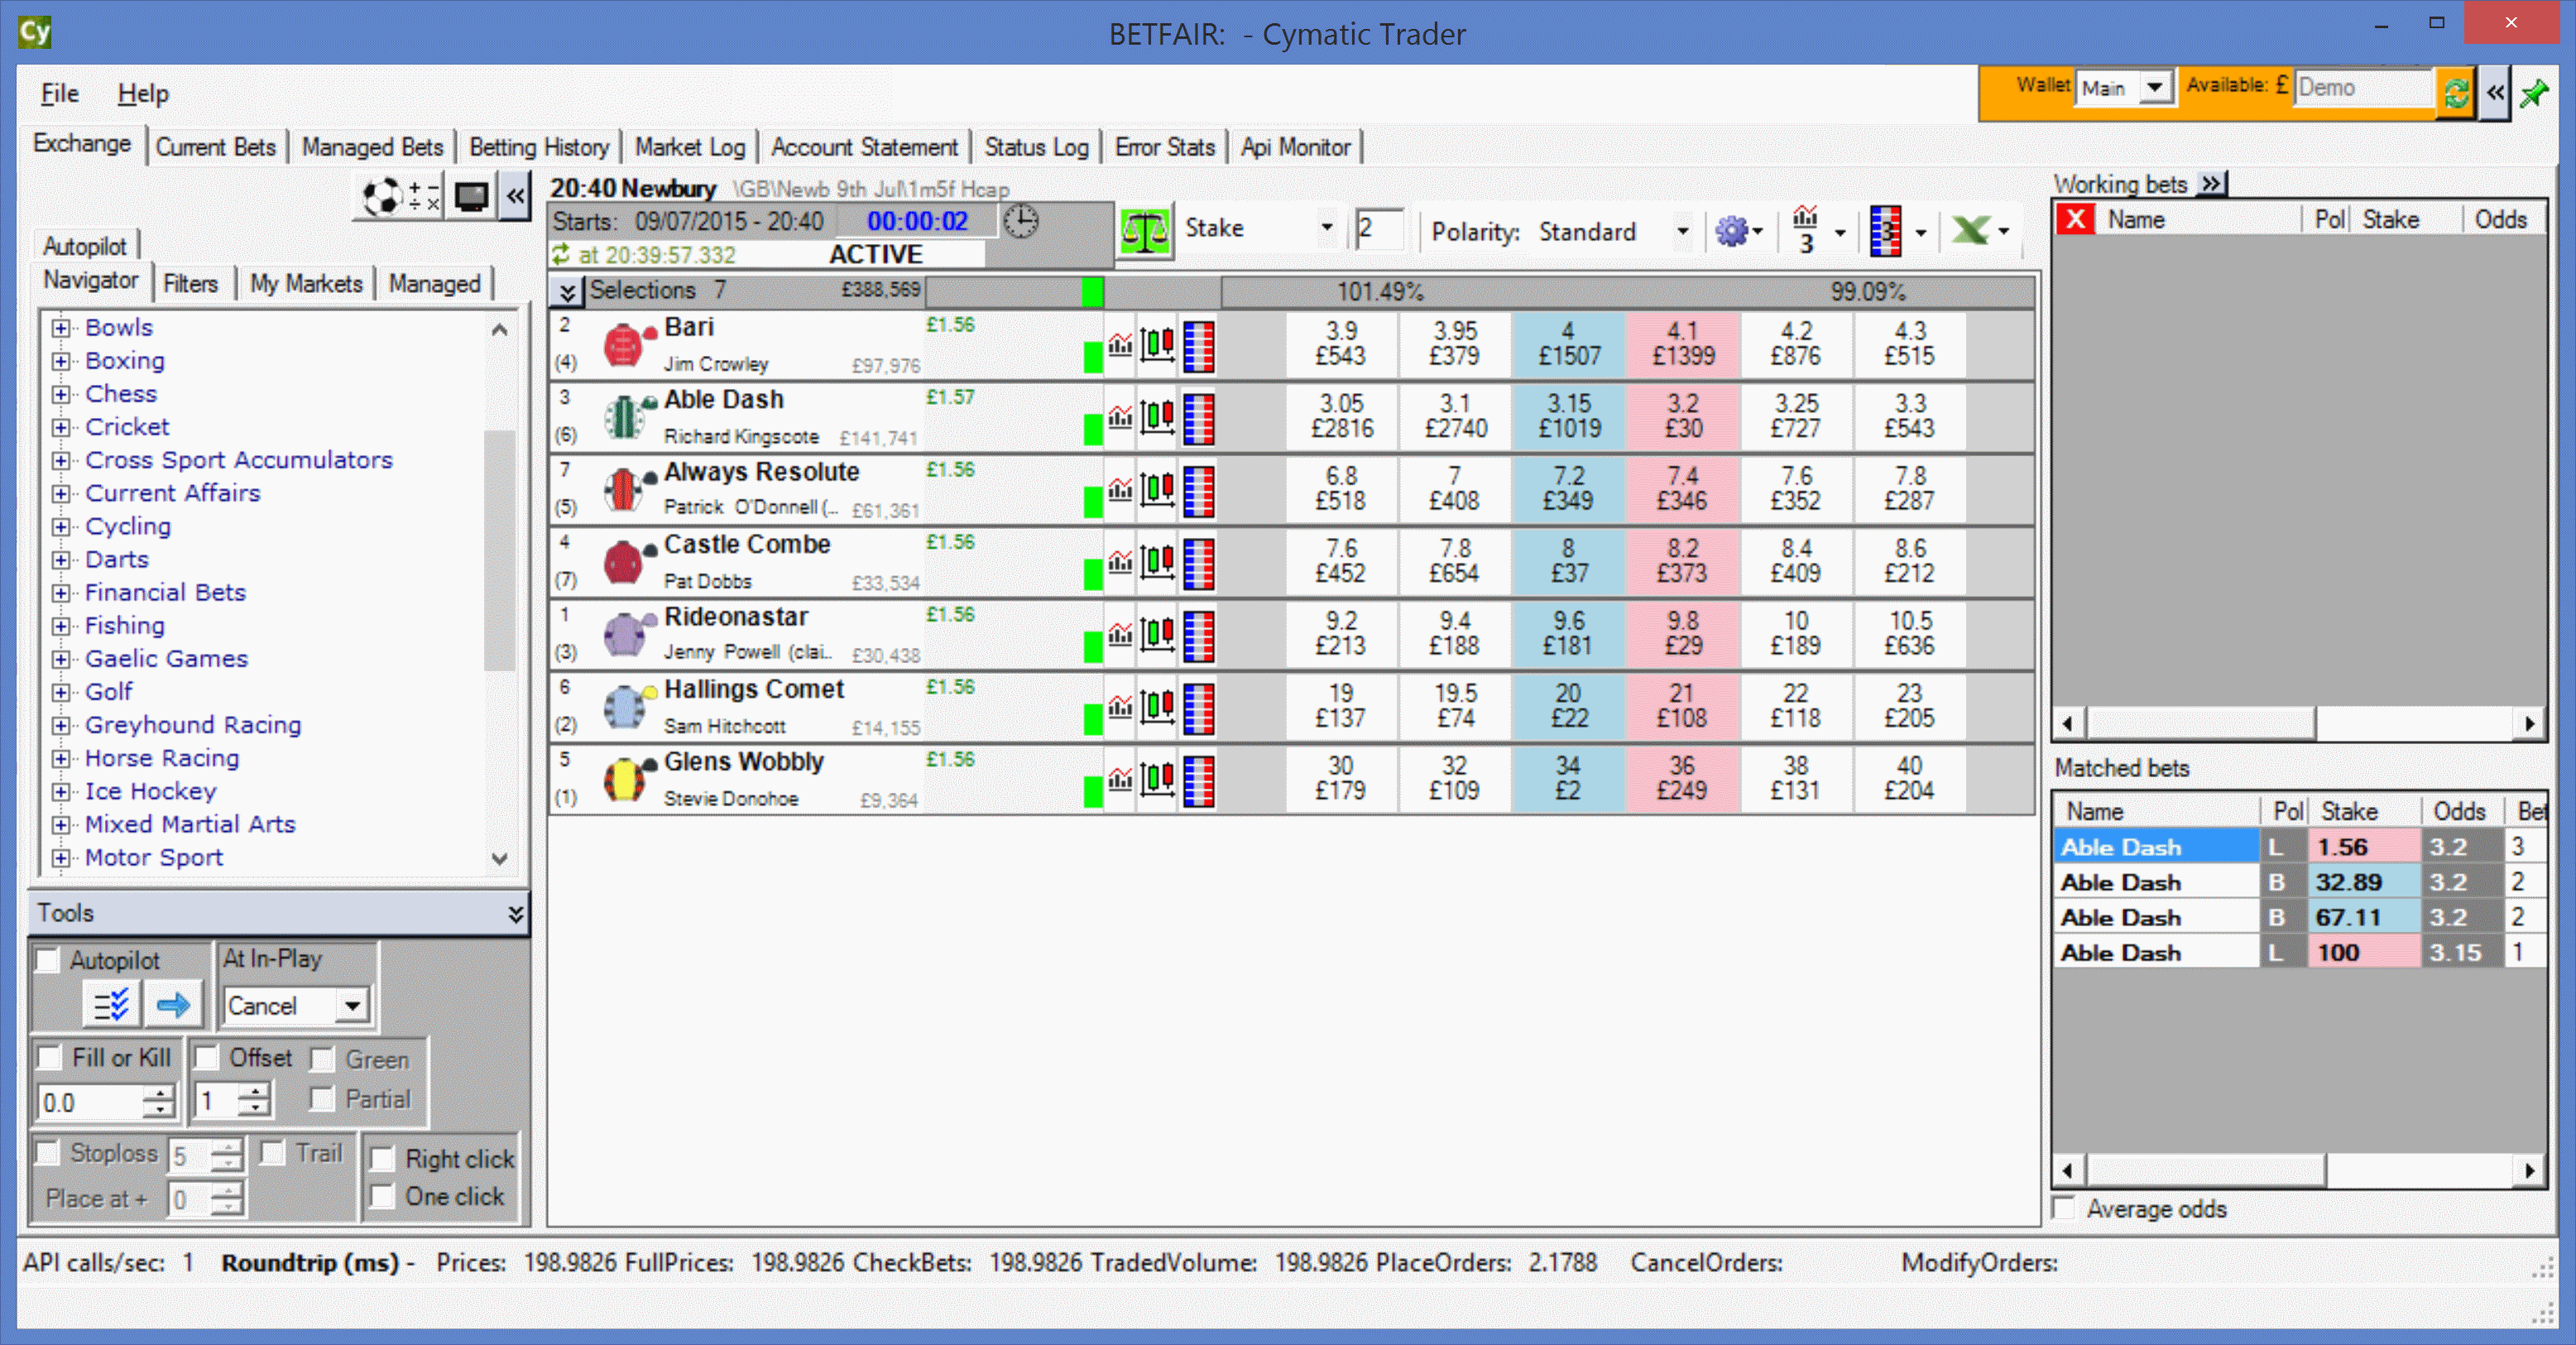 Screenshot of Exchange View (Grid) Interface for Advanced Cymatic Trader, for Betfair.